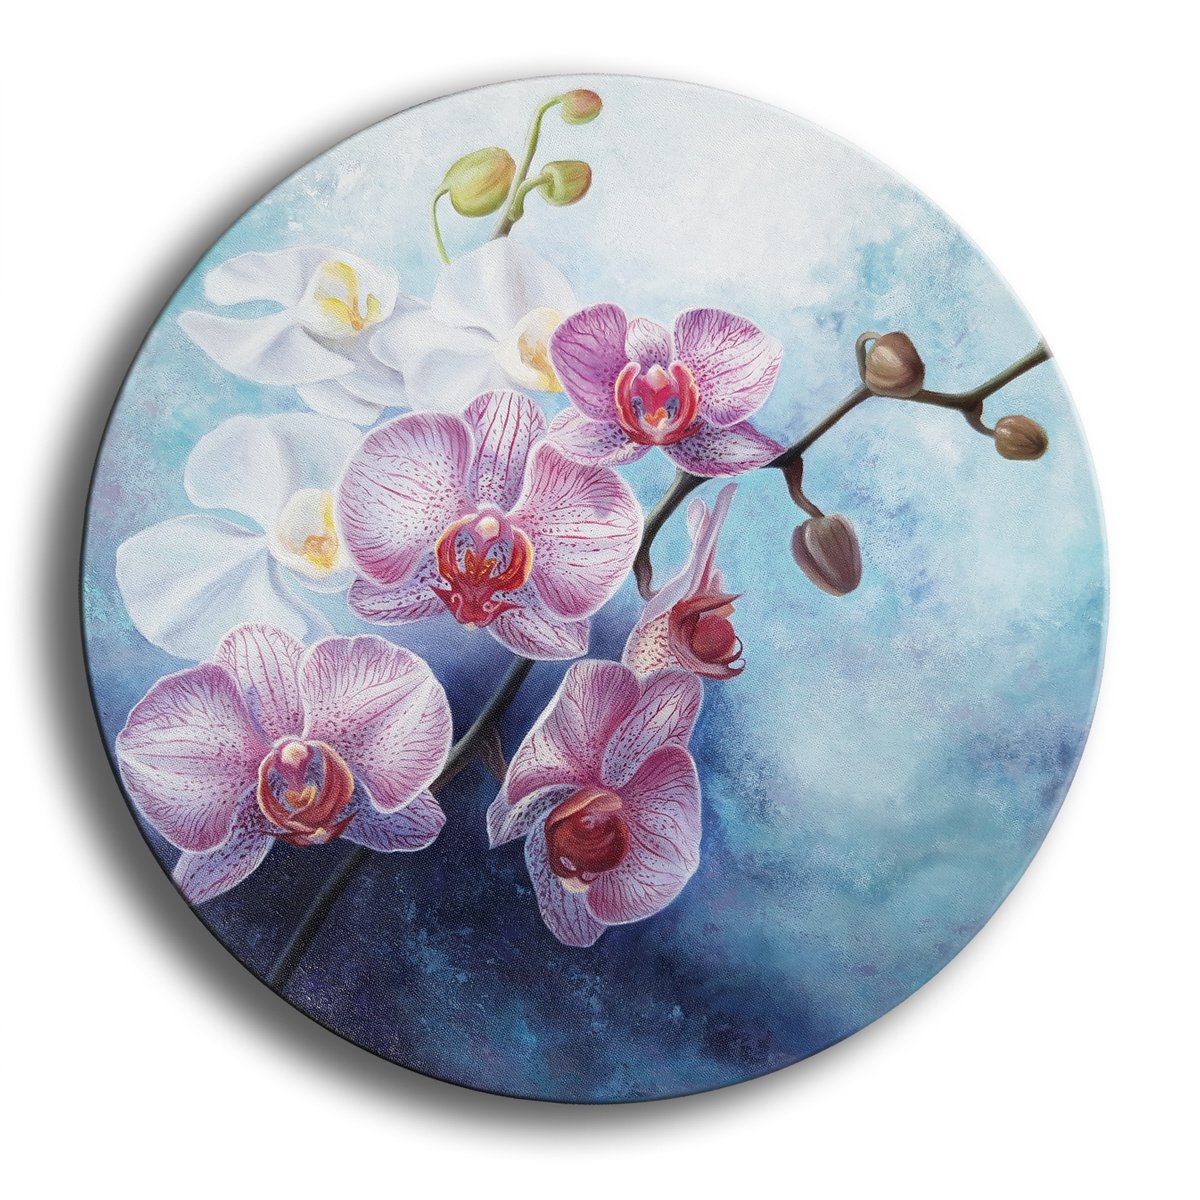 Orchid charm, circle canvas flowers painting, oil floral art by Anna Steshenko